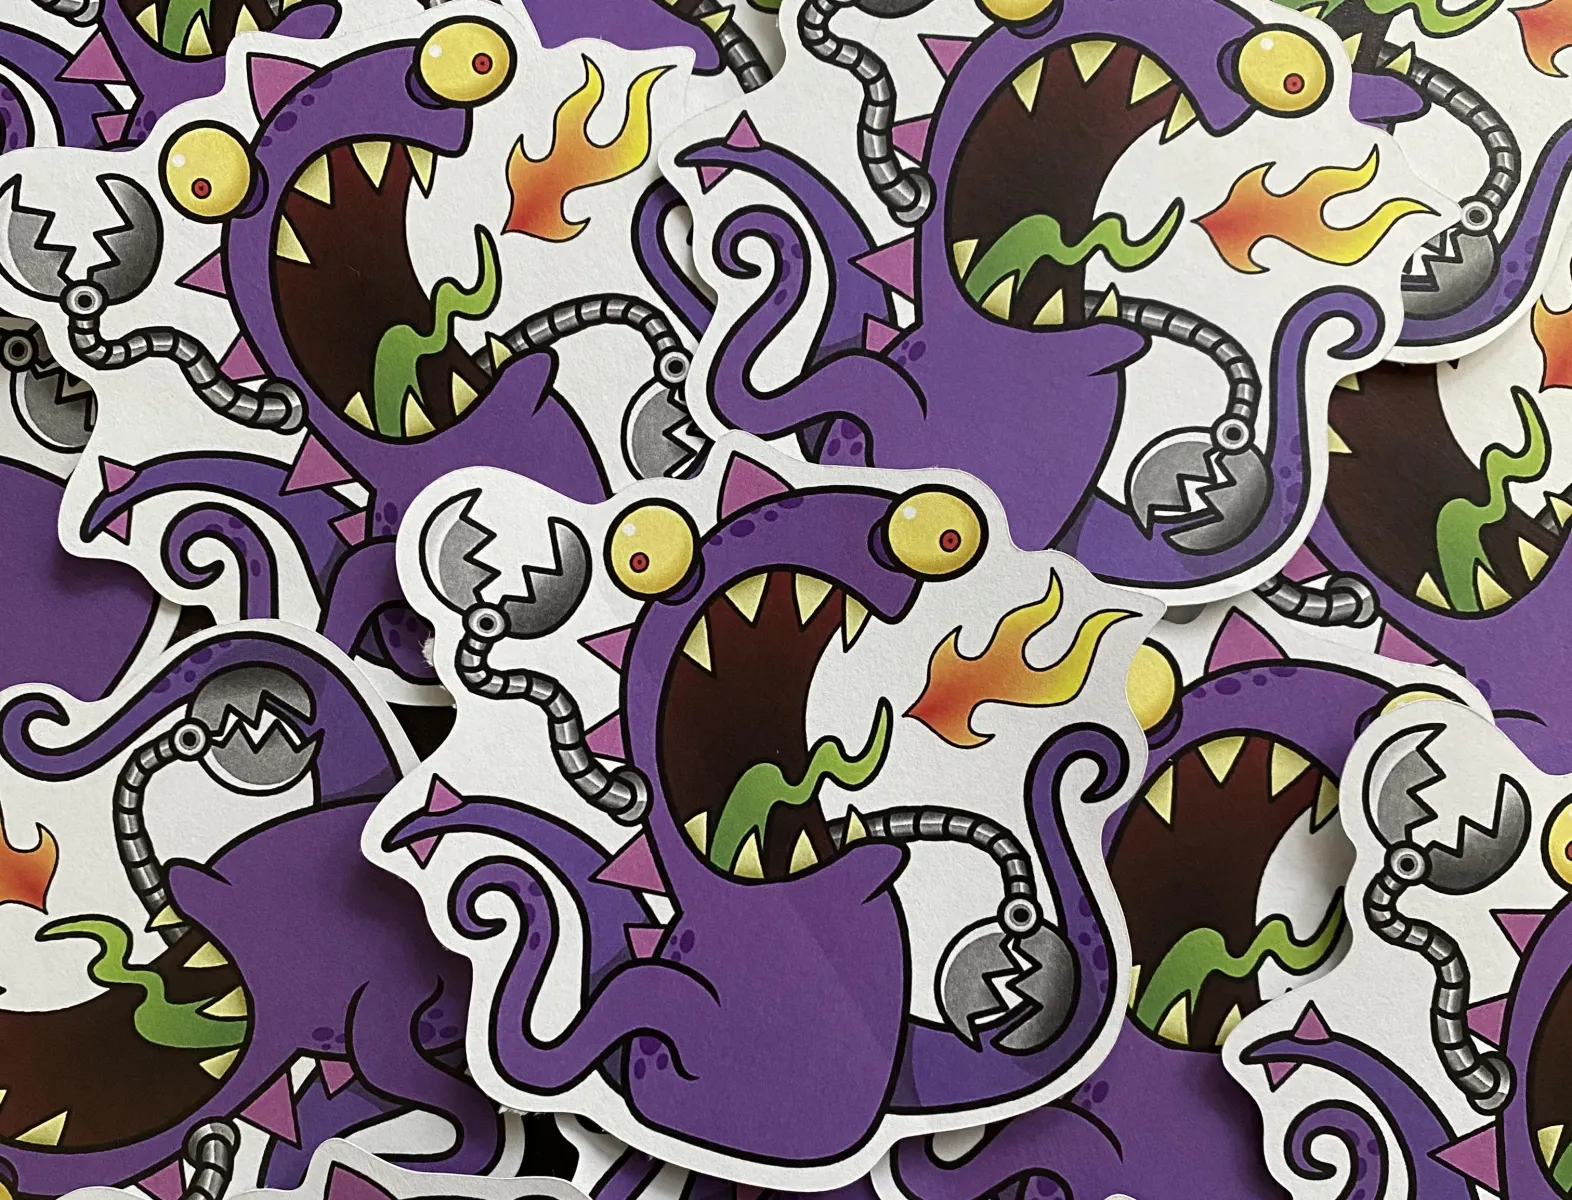 stickers that are color illustration of a a Mega Beastie - a fire-beathing dragon monster with robot arms.